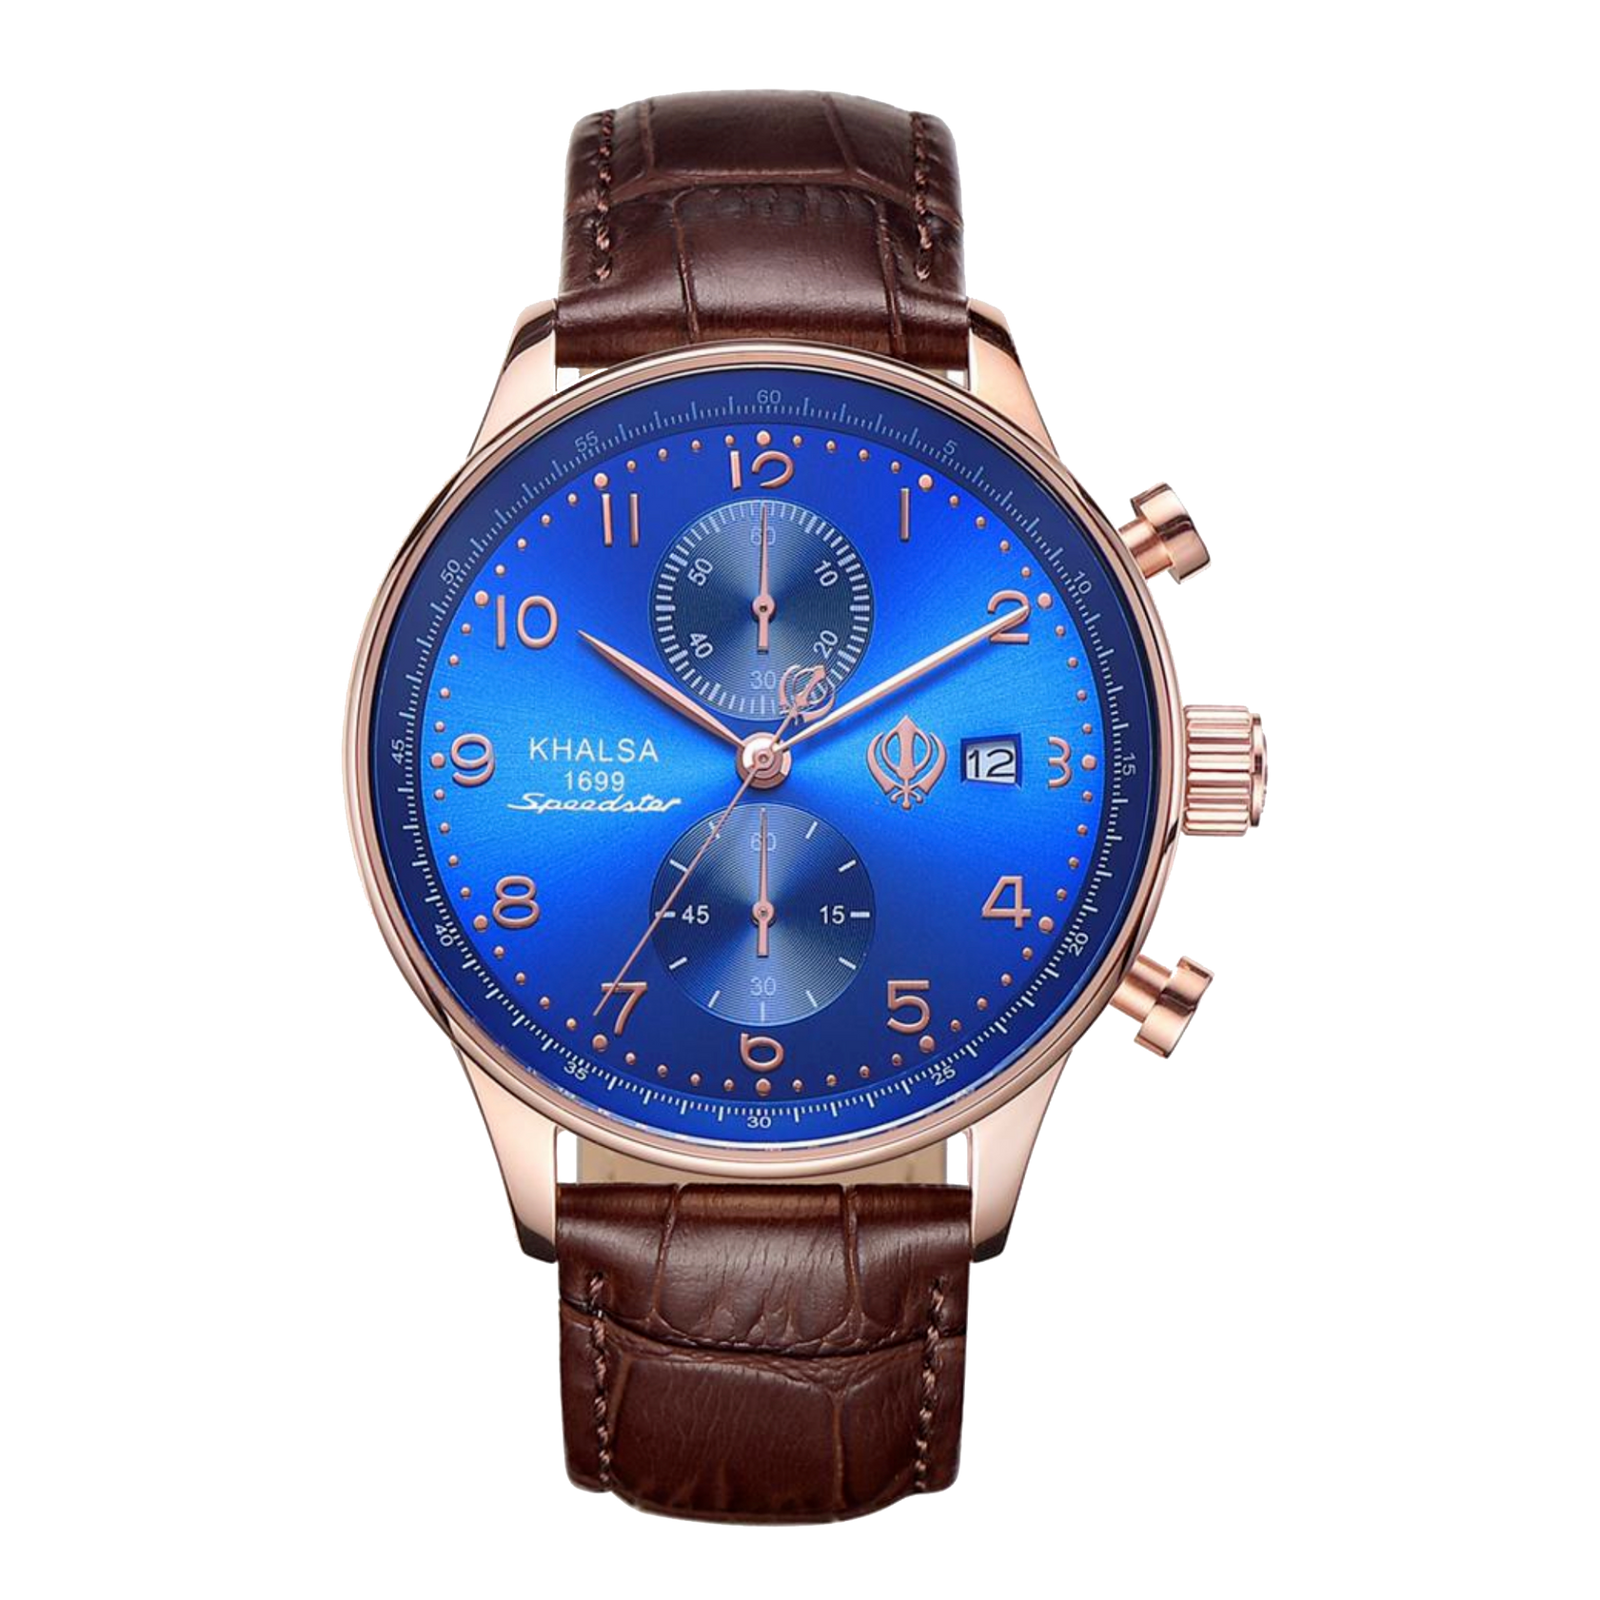 House of Khalsa Sea Blue Speedster Khalsa Analog Chronograph Luxury Sikh Watch With Khanda Symbol On The Dial and Brown Leather Strap - Precision Timekeeping